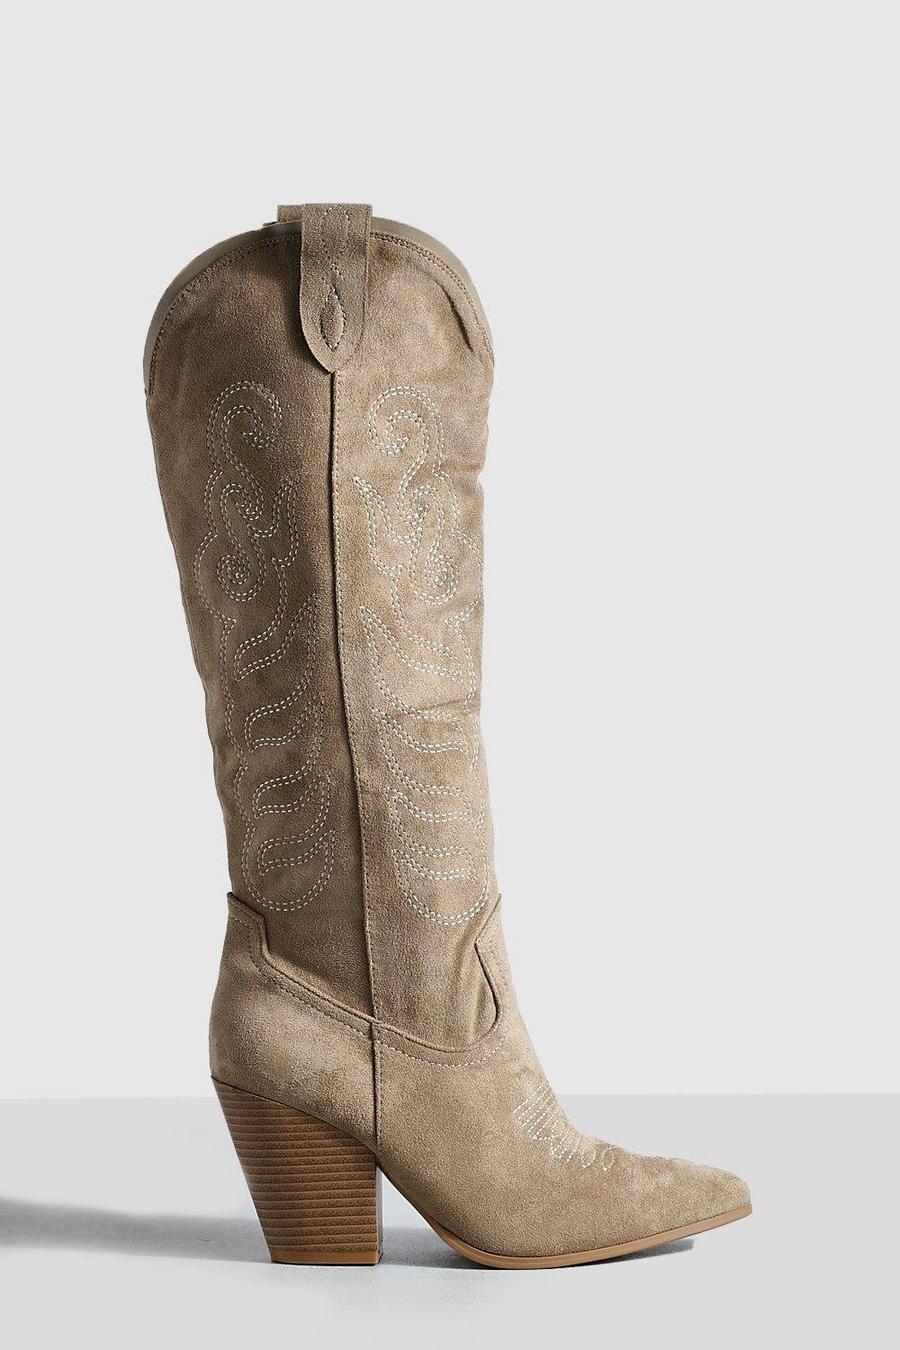 Taupe beige Embroidered Knee High Western Cowboy Boots